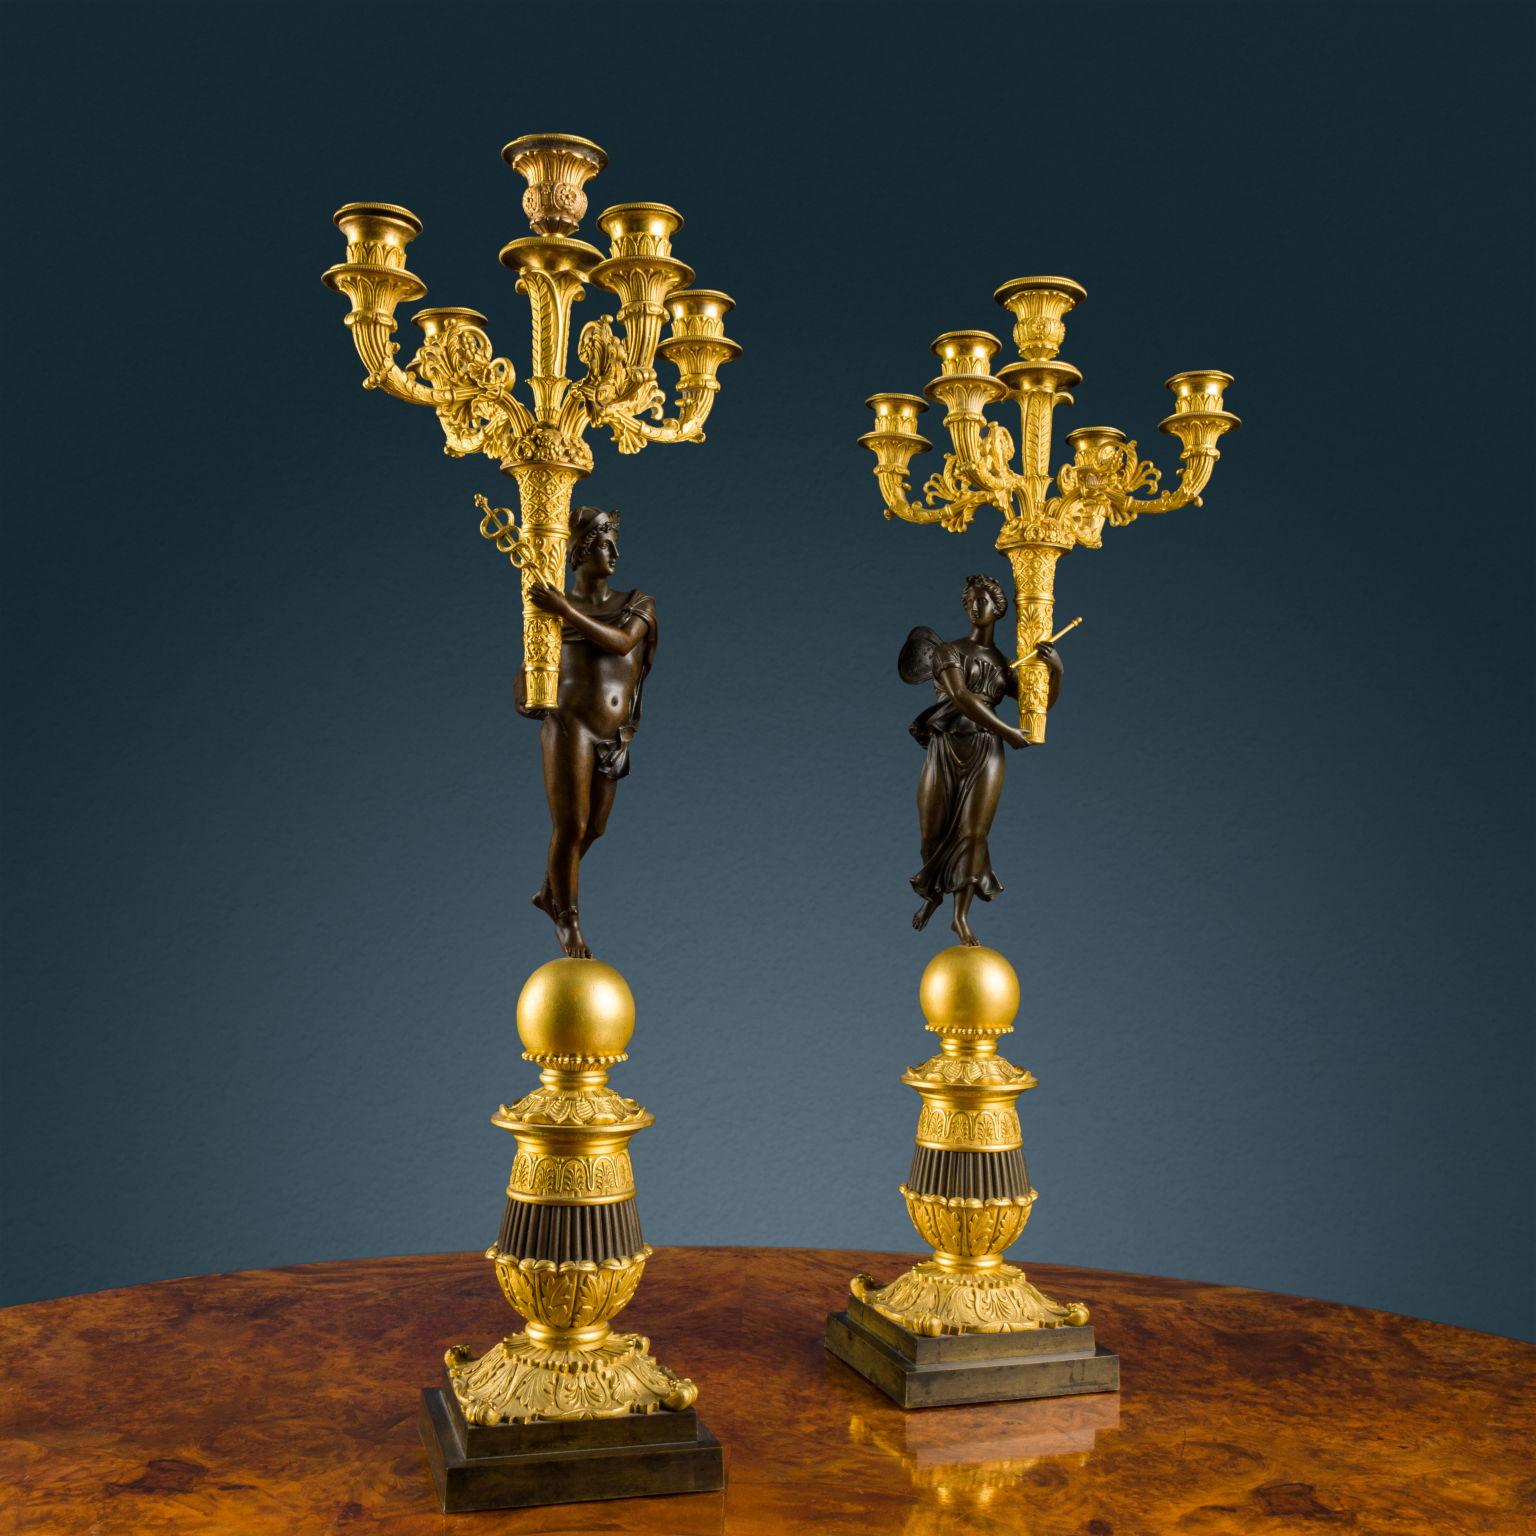 Pair of partially gilded and burnished bronze candelabra. Stepped base from which departs the turned and chiseled body with leaf and antemium motifs, at the top of which is placed a gilded sphere constituting, the support point for the two burnished